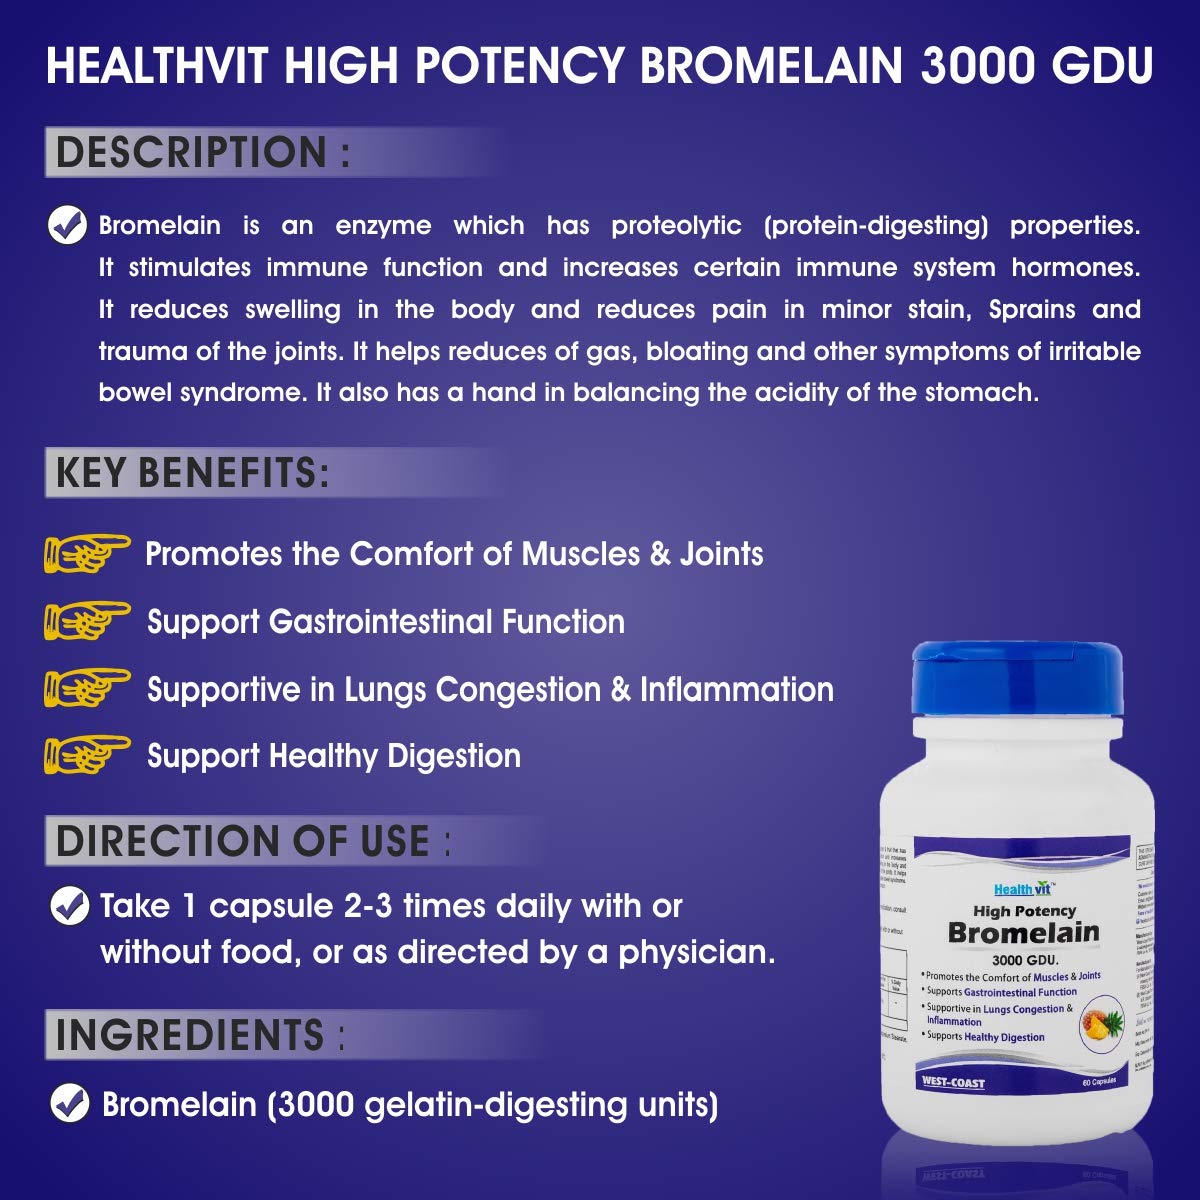 Healthvit High Potency Bromelain 3000 GDU/Gram Natural Supplement, Non-Synthetic, 500 mg, 60 Capsules| Supports Healthy Digestion & Bruises, Immune, Extra Strength